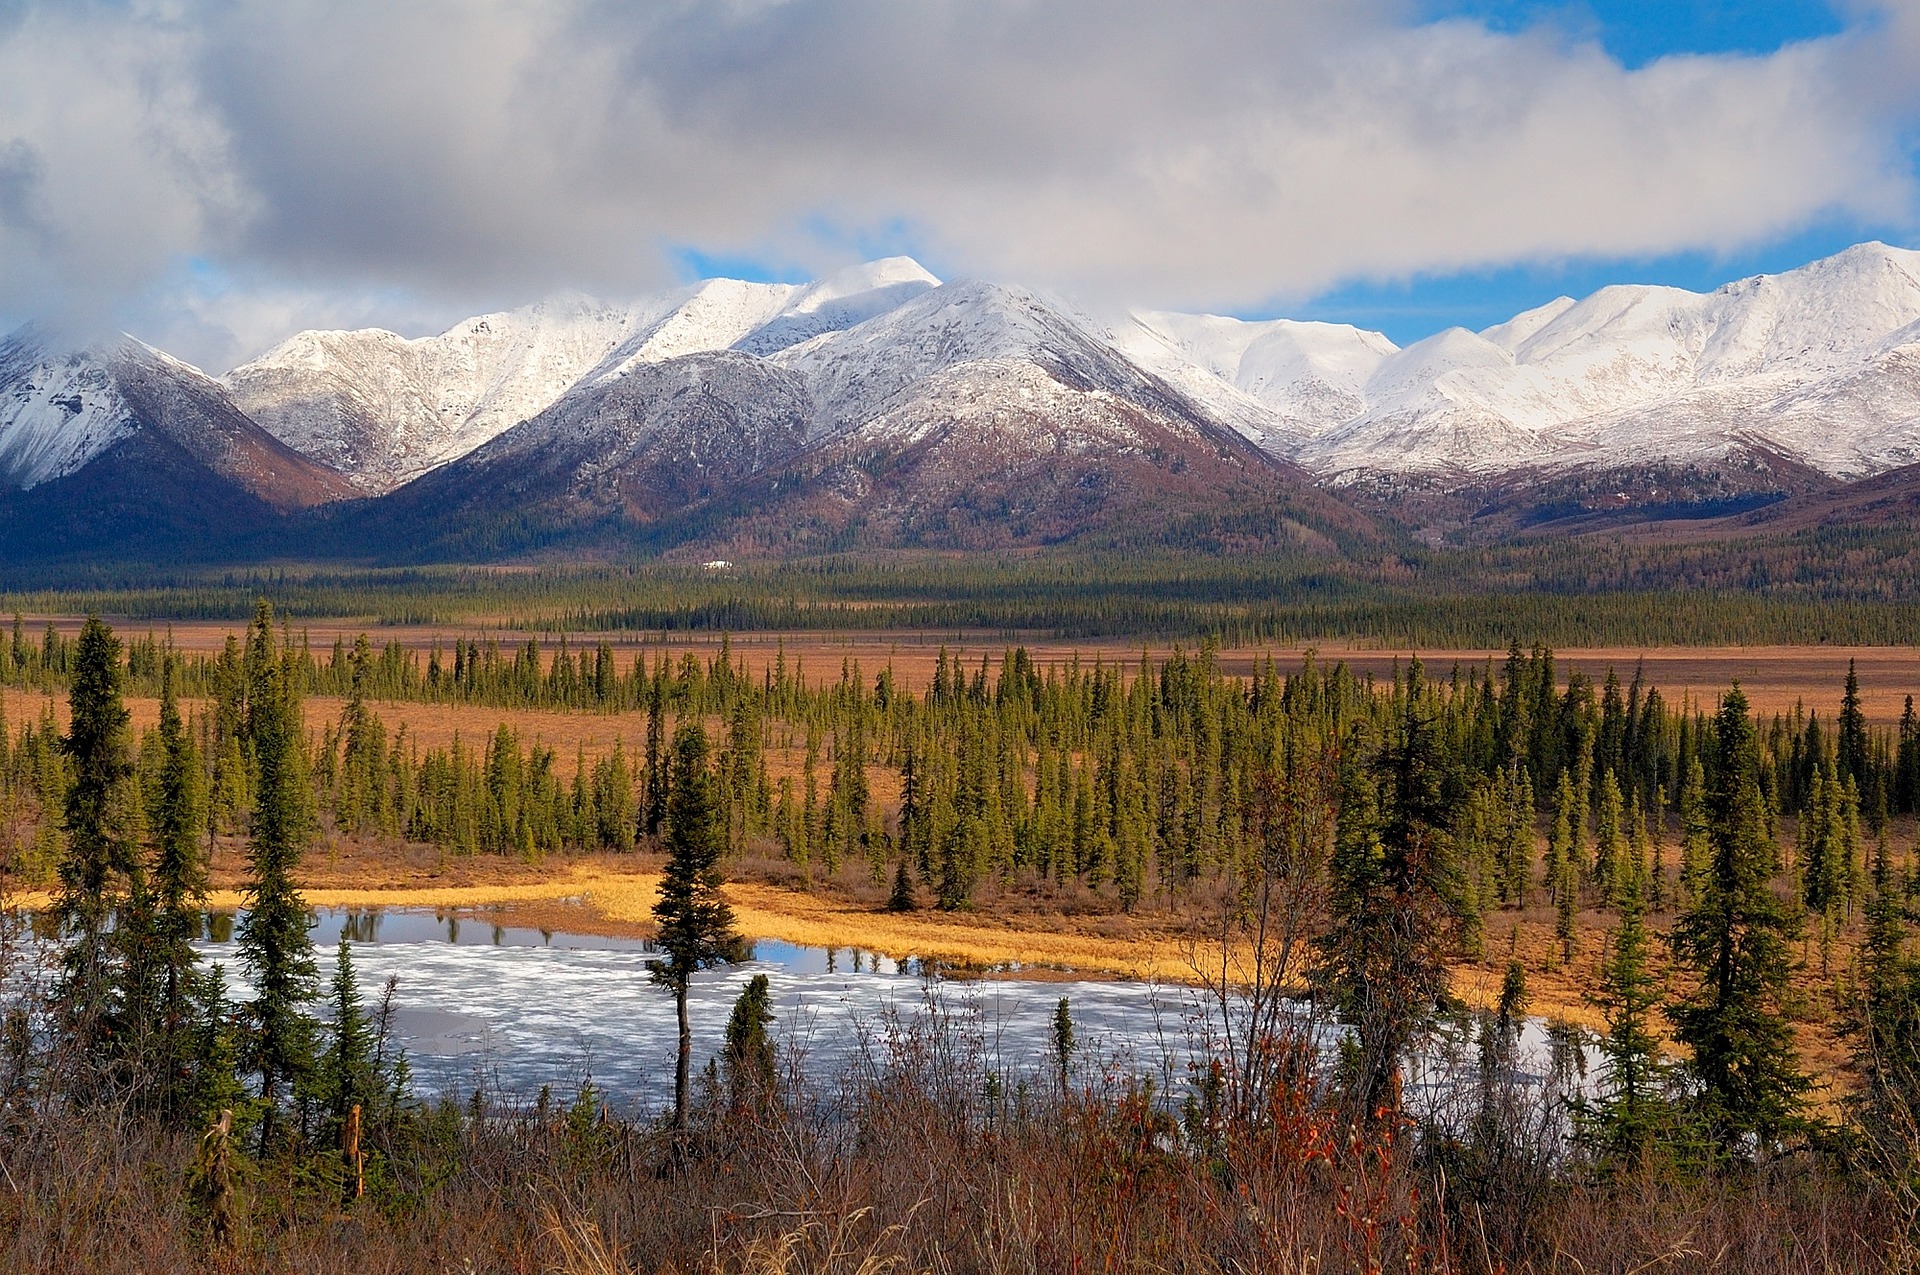 The landscape and wildlife you'll discover in Alaska is breathtaking. Source: Pixabay